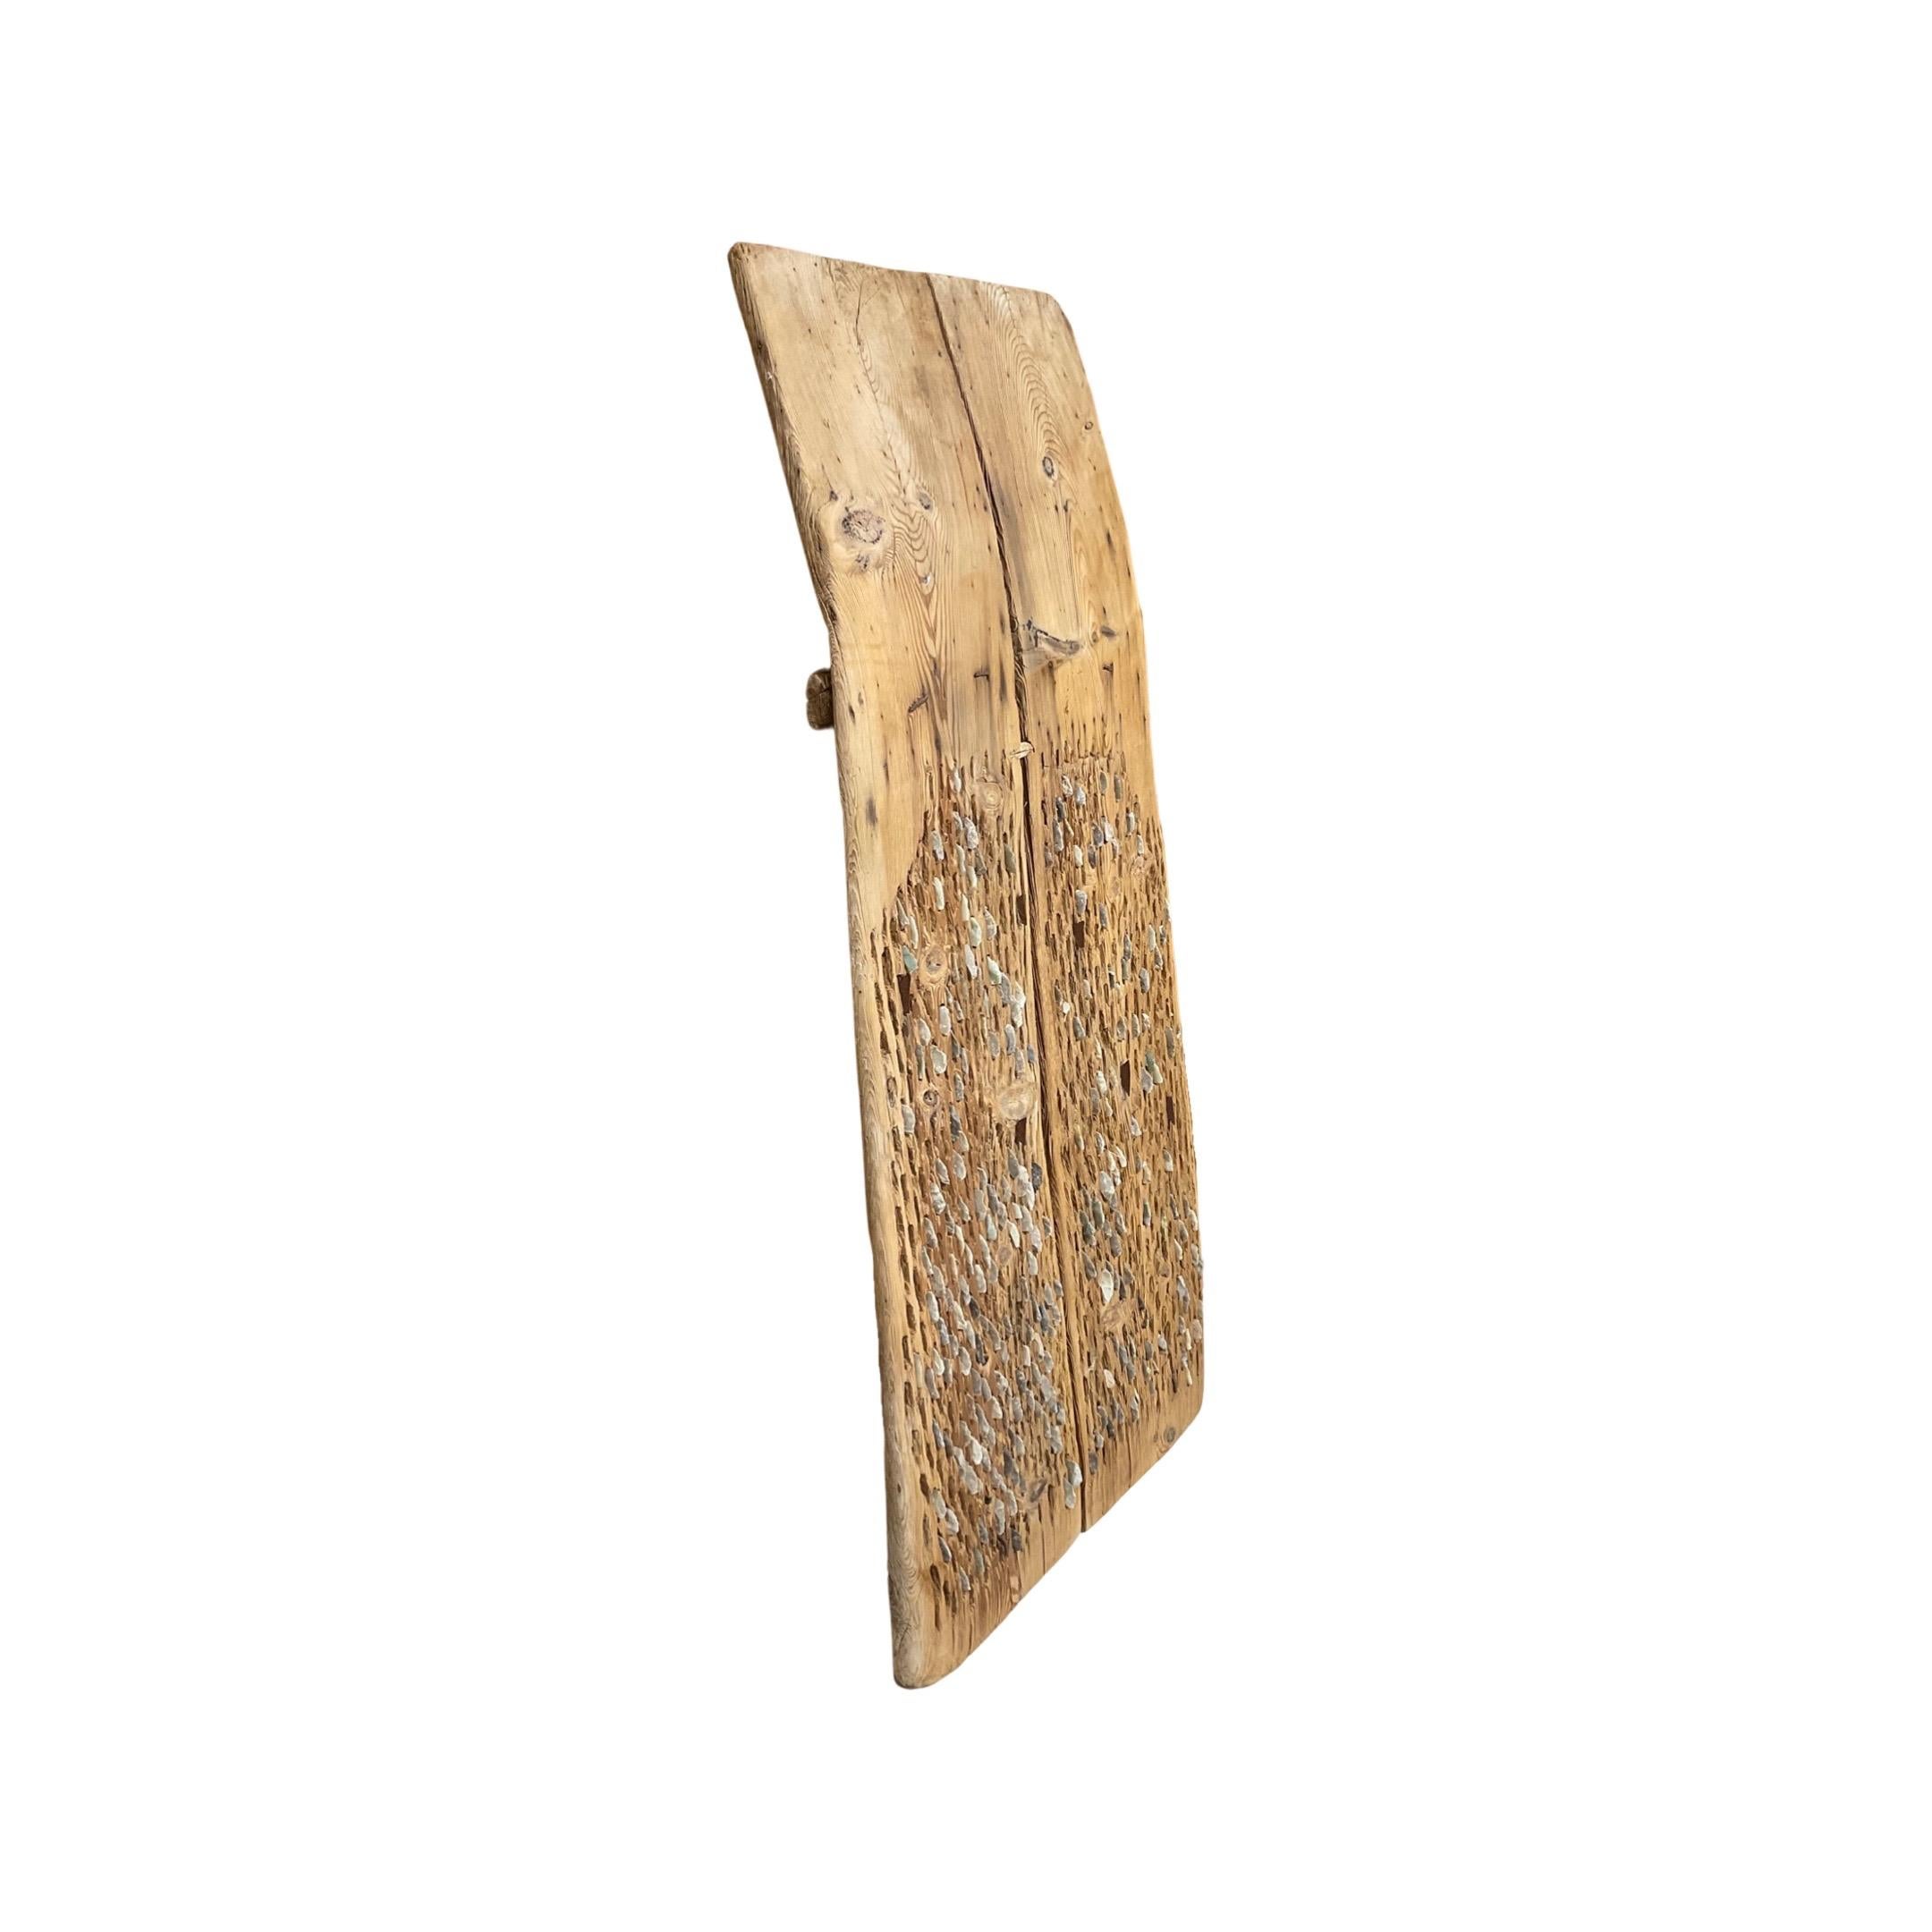 This unique Greece Wooden and Flint Stone Thresher is an authentic piece of 18th century furniture. Handcrafted in Greece, it's composed of natural wood and flint stones. Perfect for threshing, sorting, and cleaning wheat, it's perfect for any